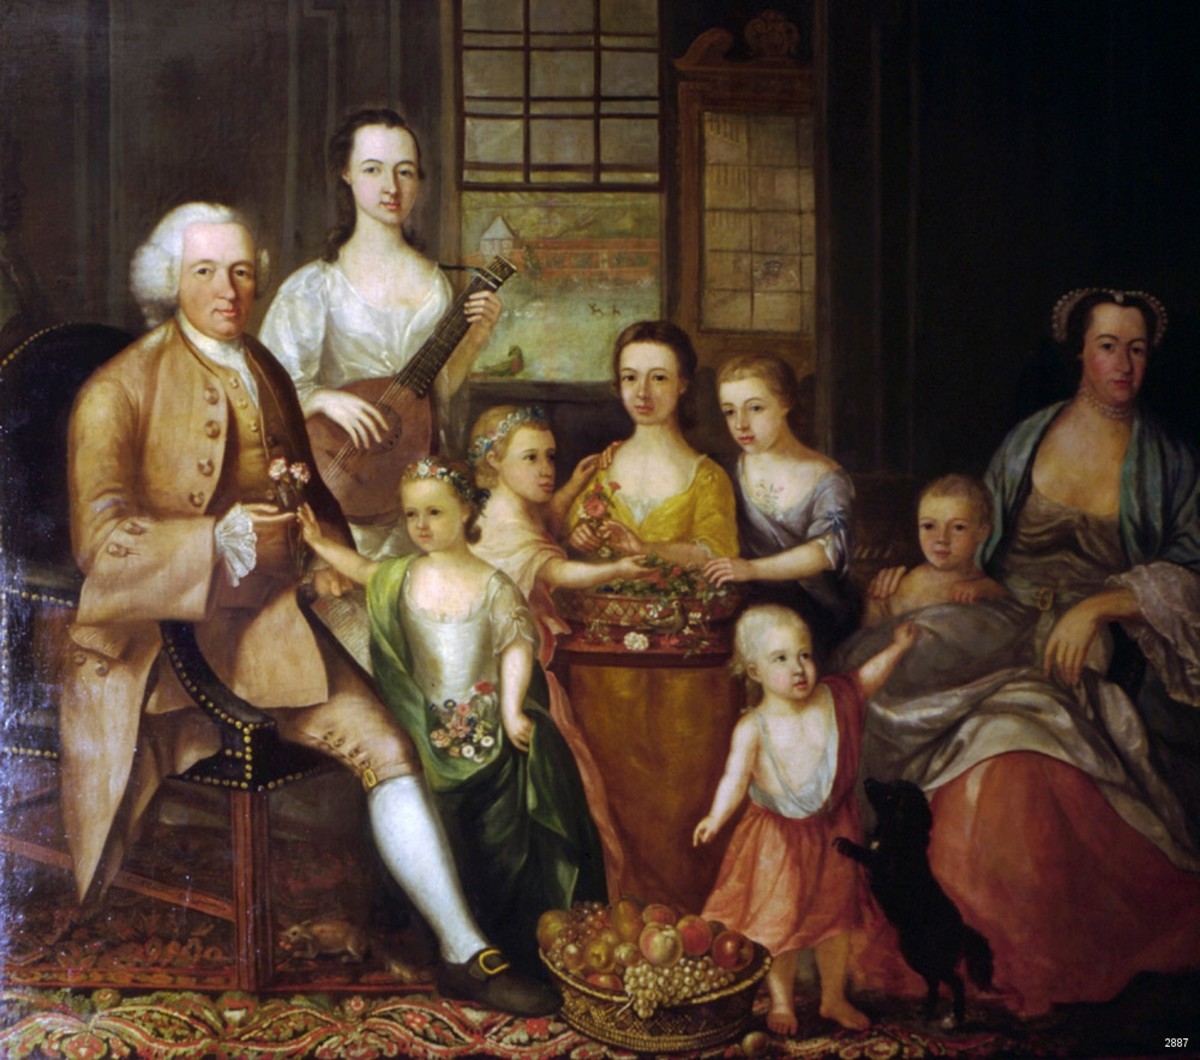 John Glassford and his family